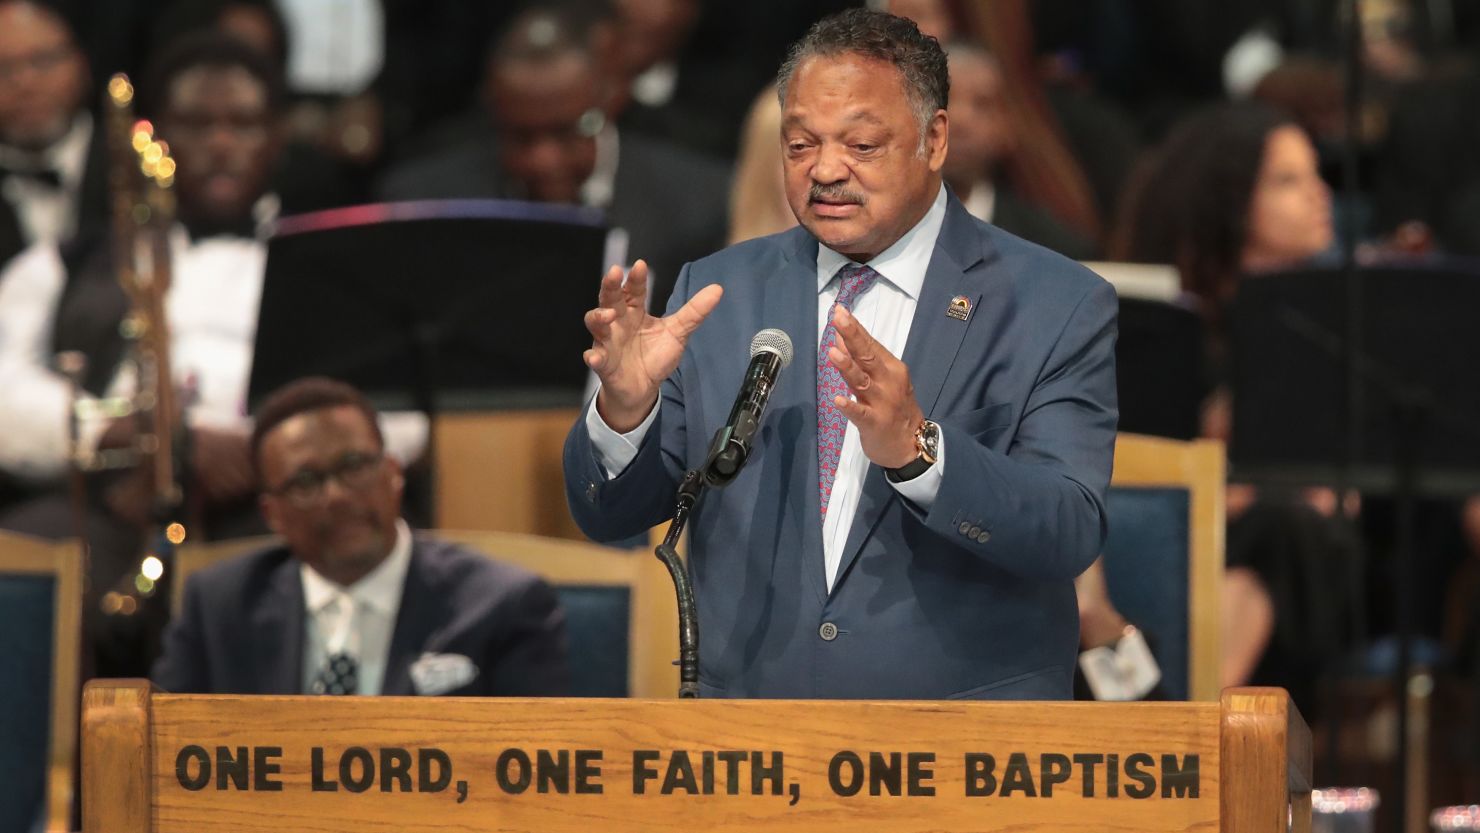 Rev. Jesse Jackson speaks at the funeral for Aretha Franklin at the Greater Grace Temple on August 31, 2018, in Detroit, Michigan. Franklin died at the age of 76 at her home in Detroit on August 16. 